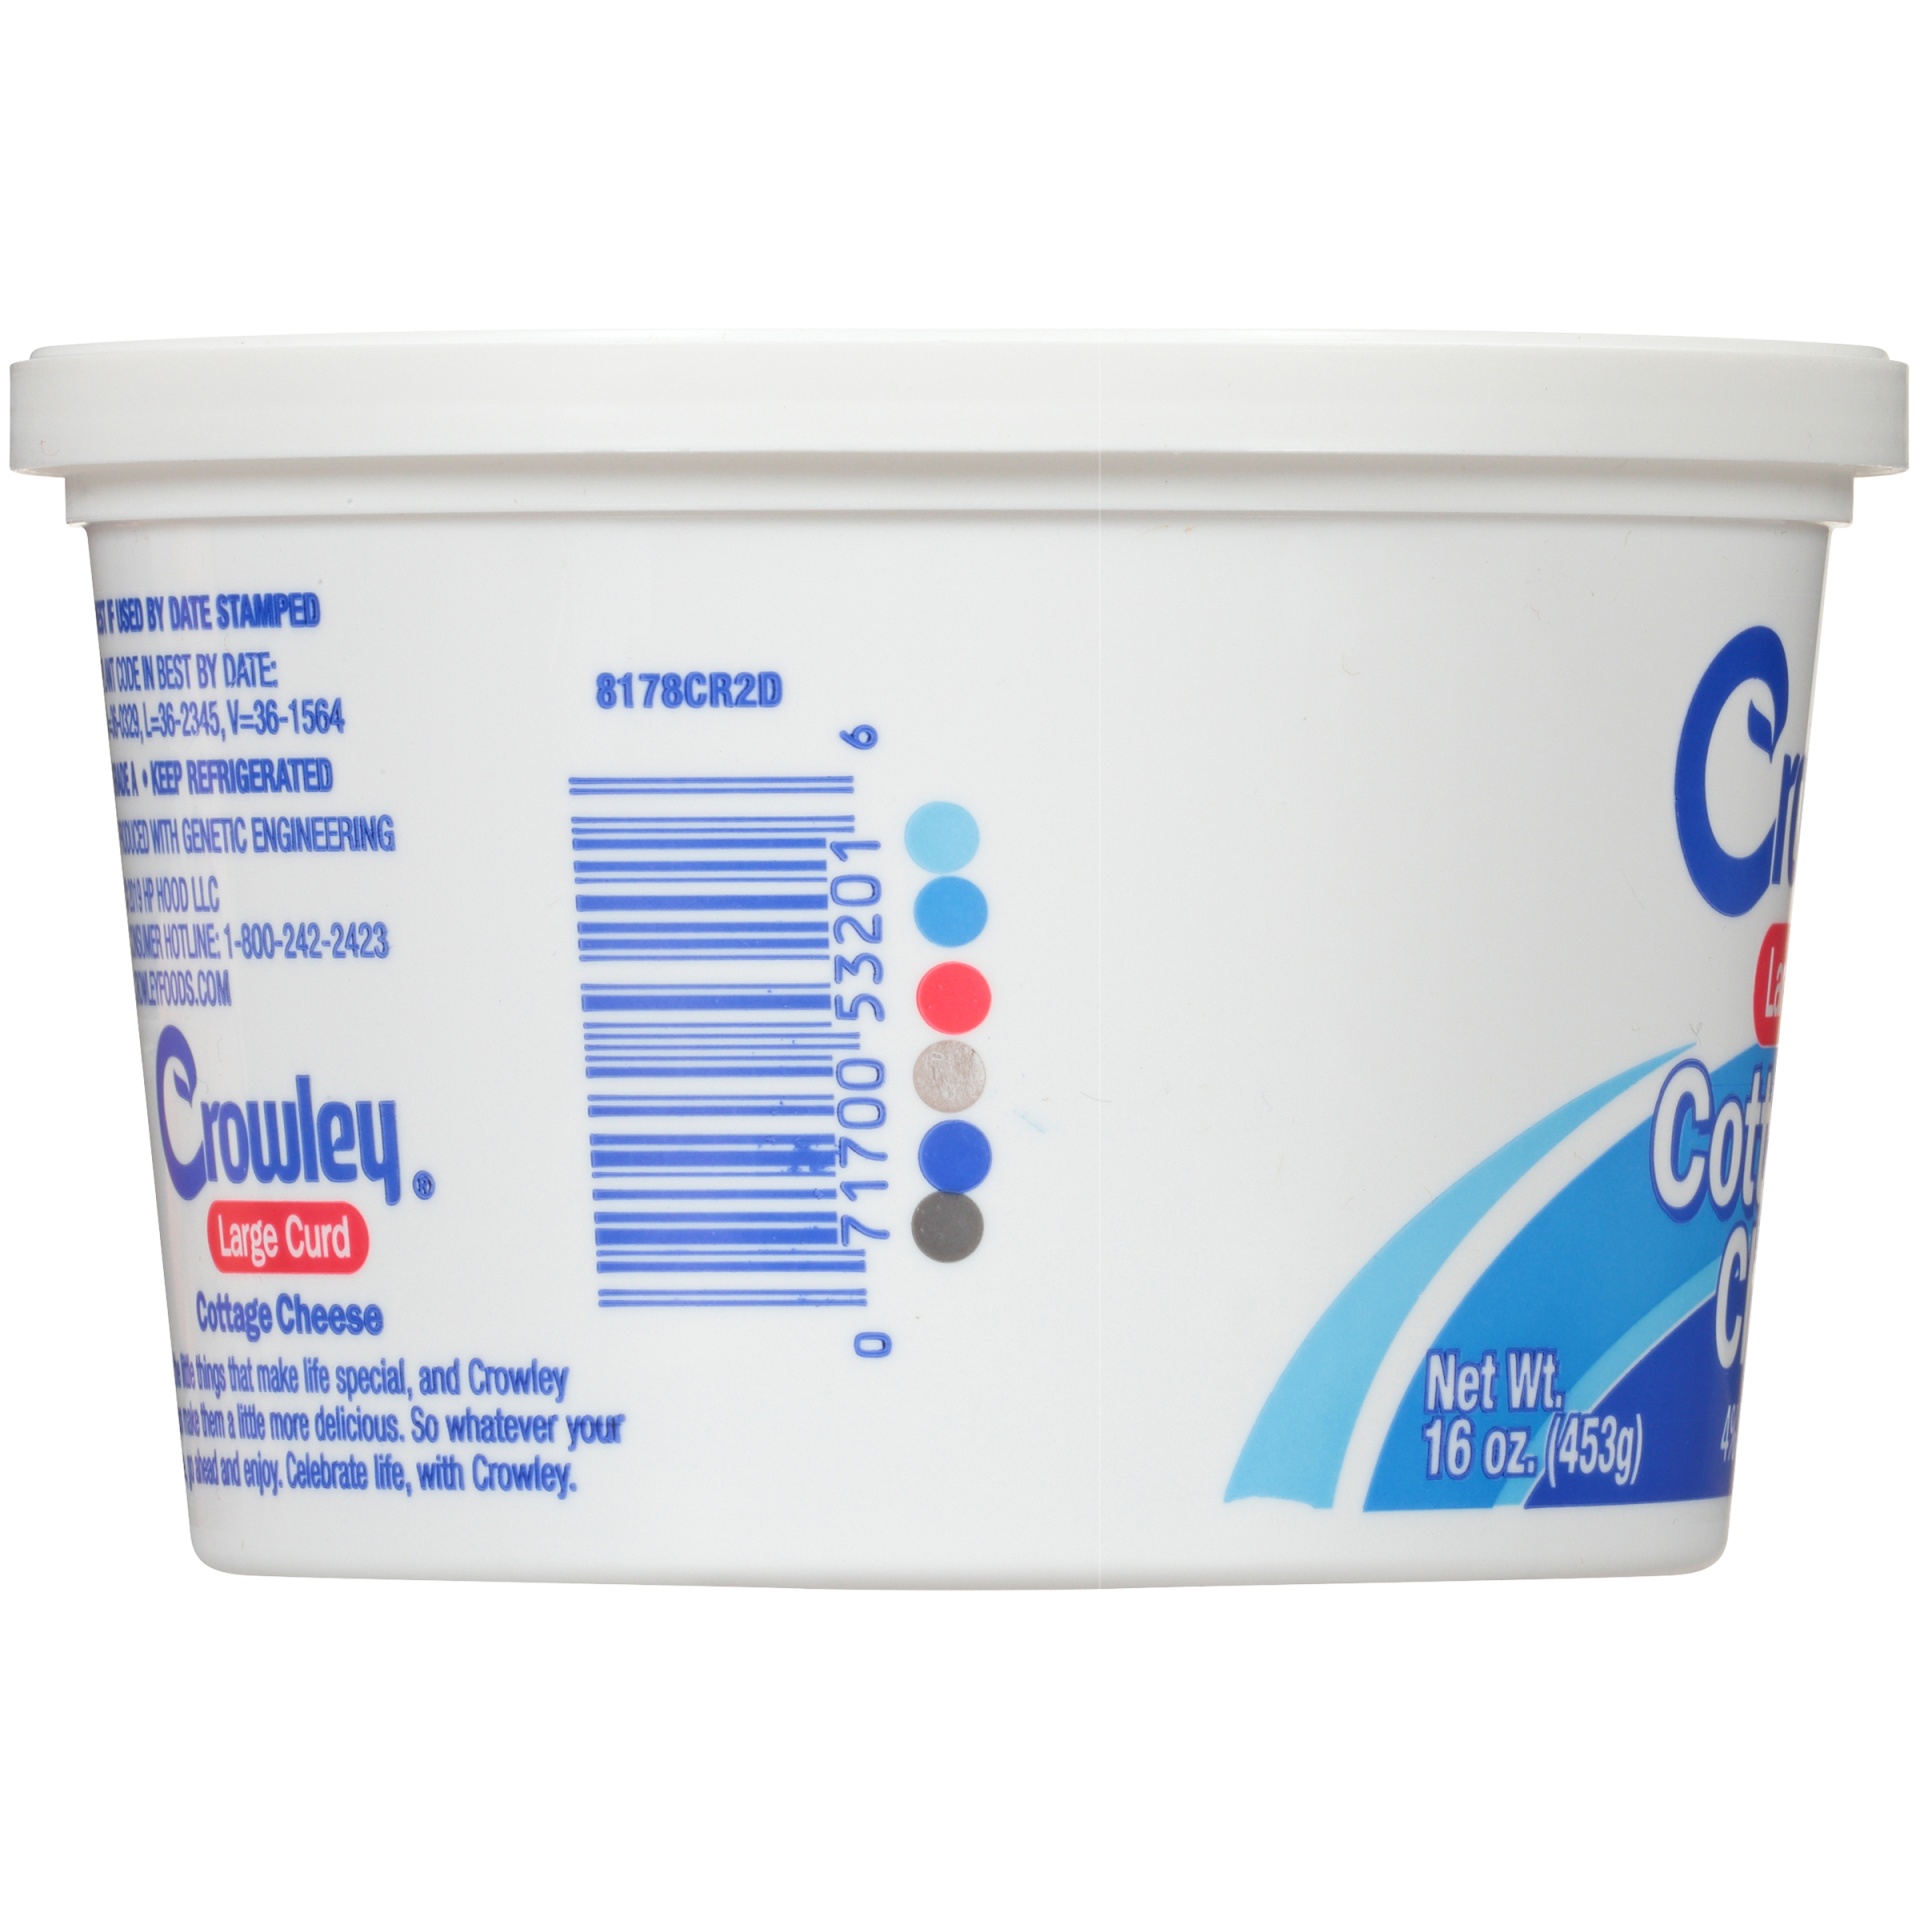 slide 4 of 7, Crowley Large Curd Cottage Cheese, 16 oz